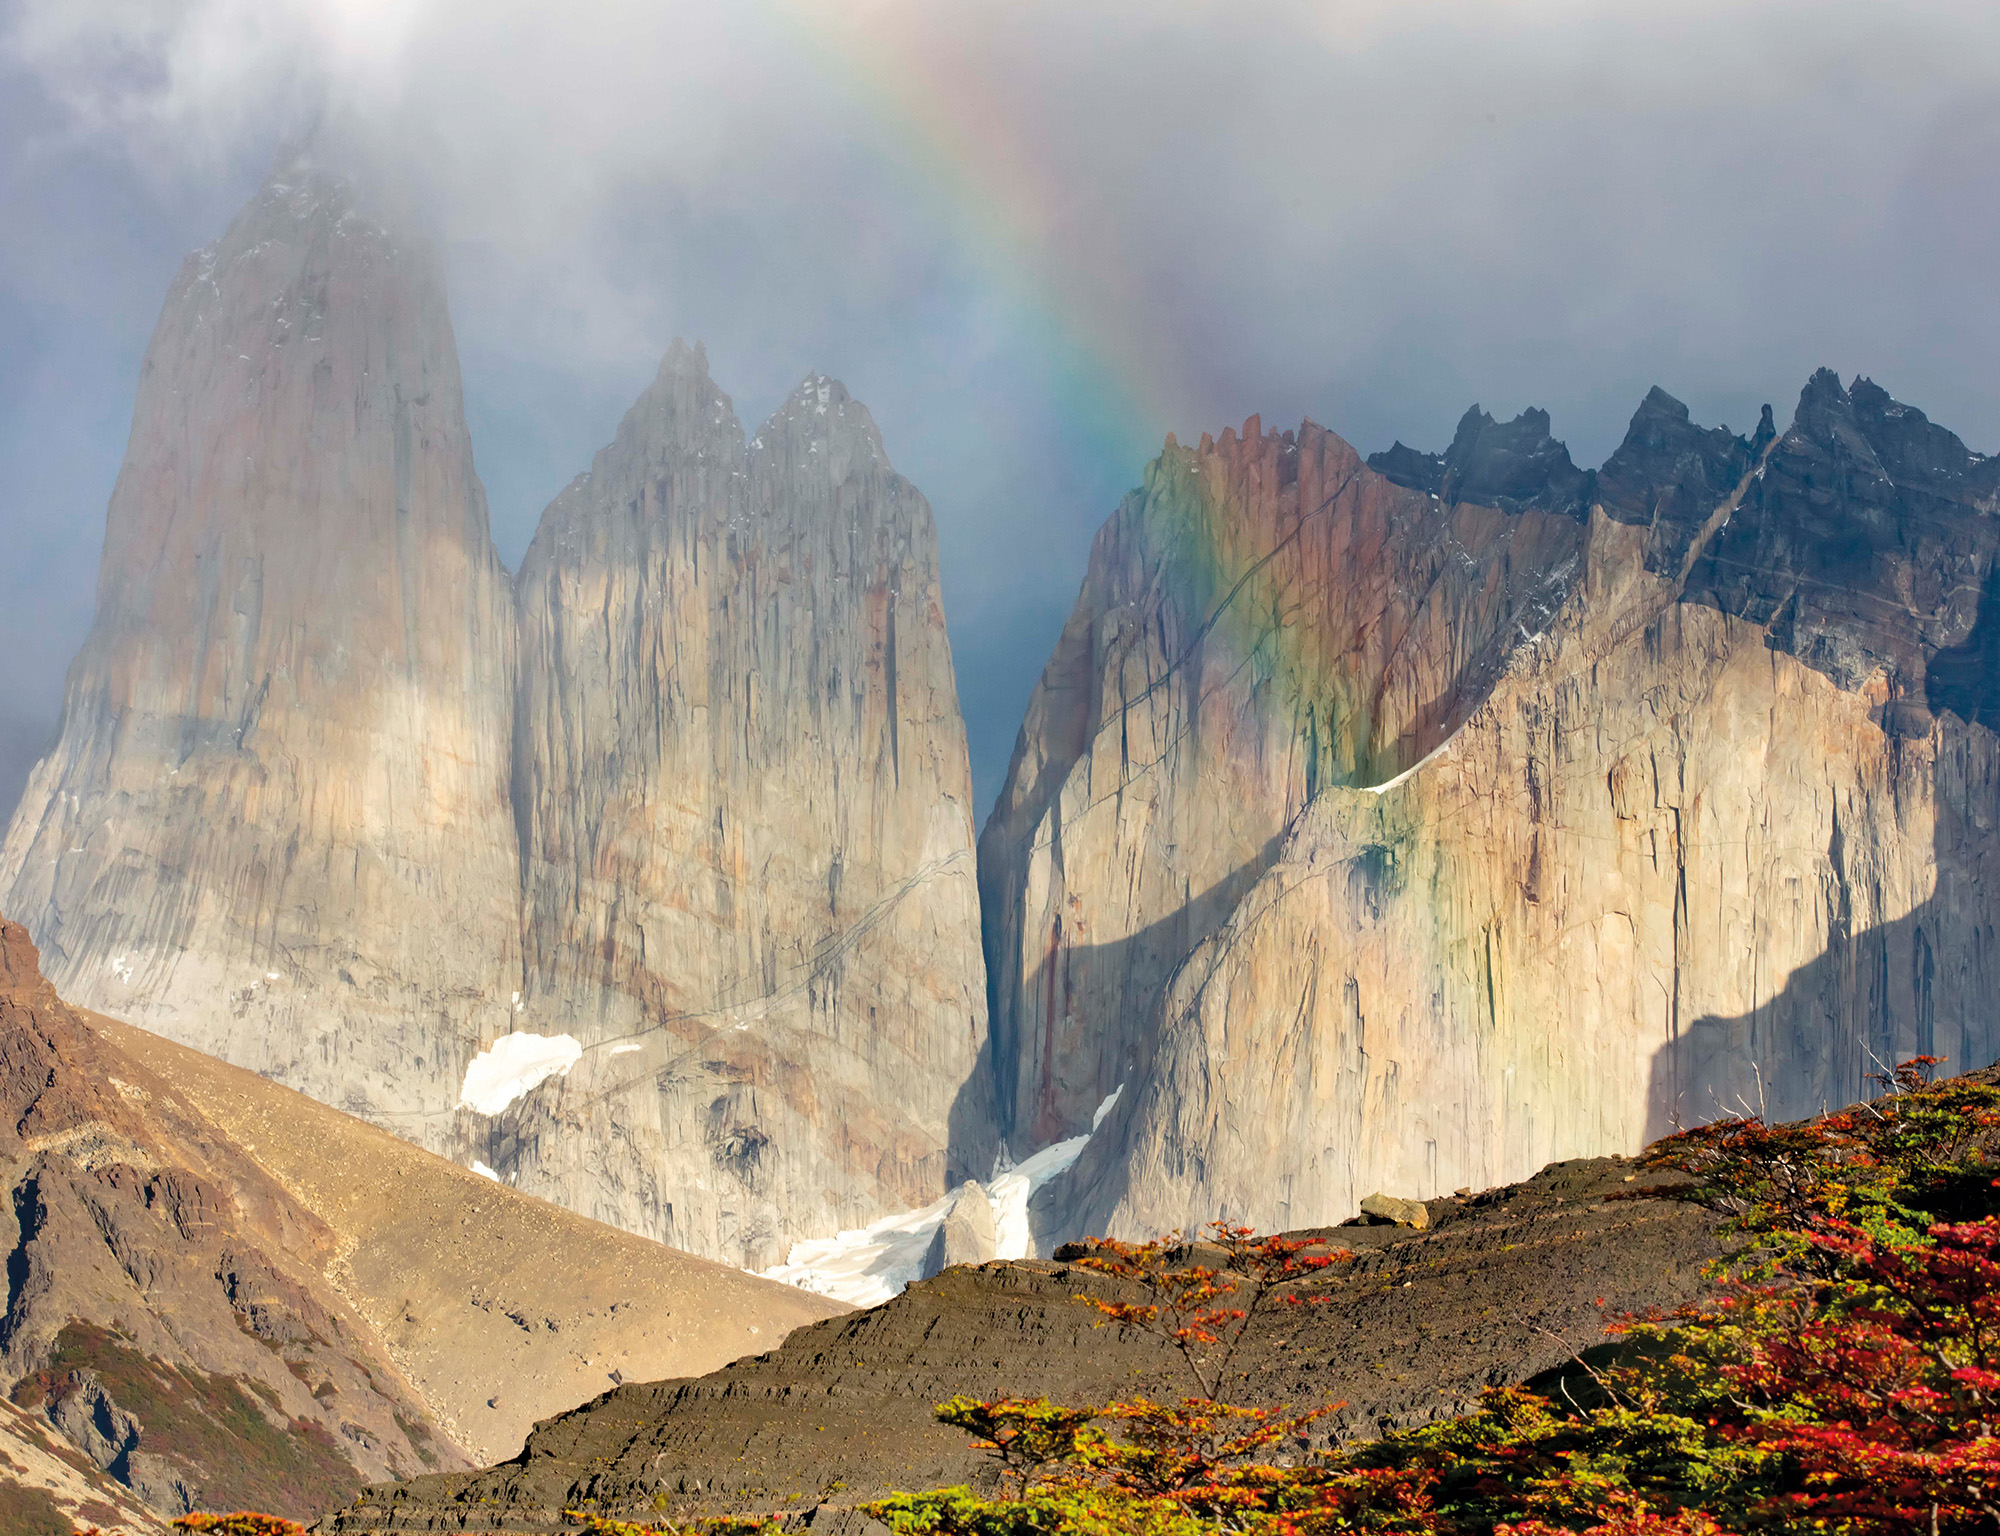 Hiking Circuits in Torres del Paine